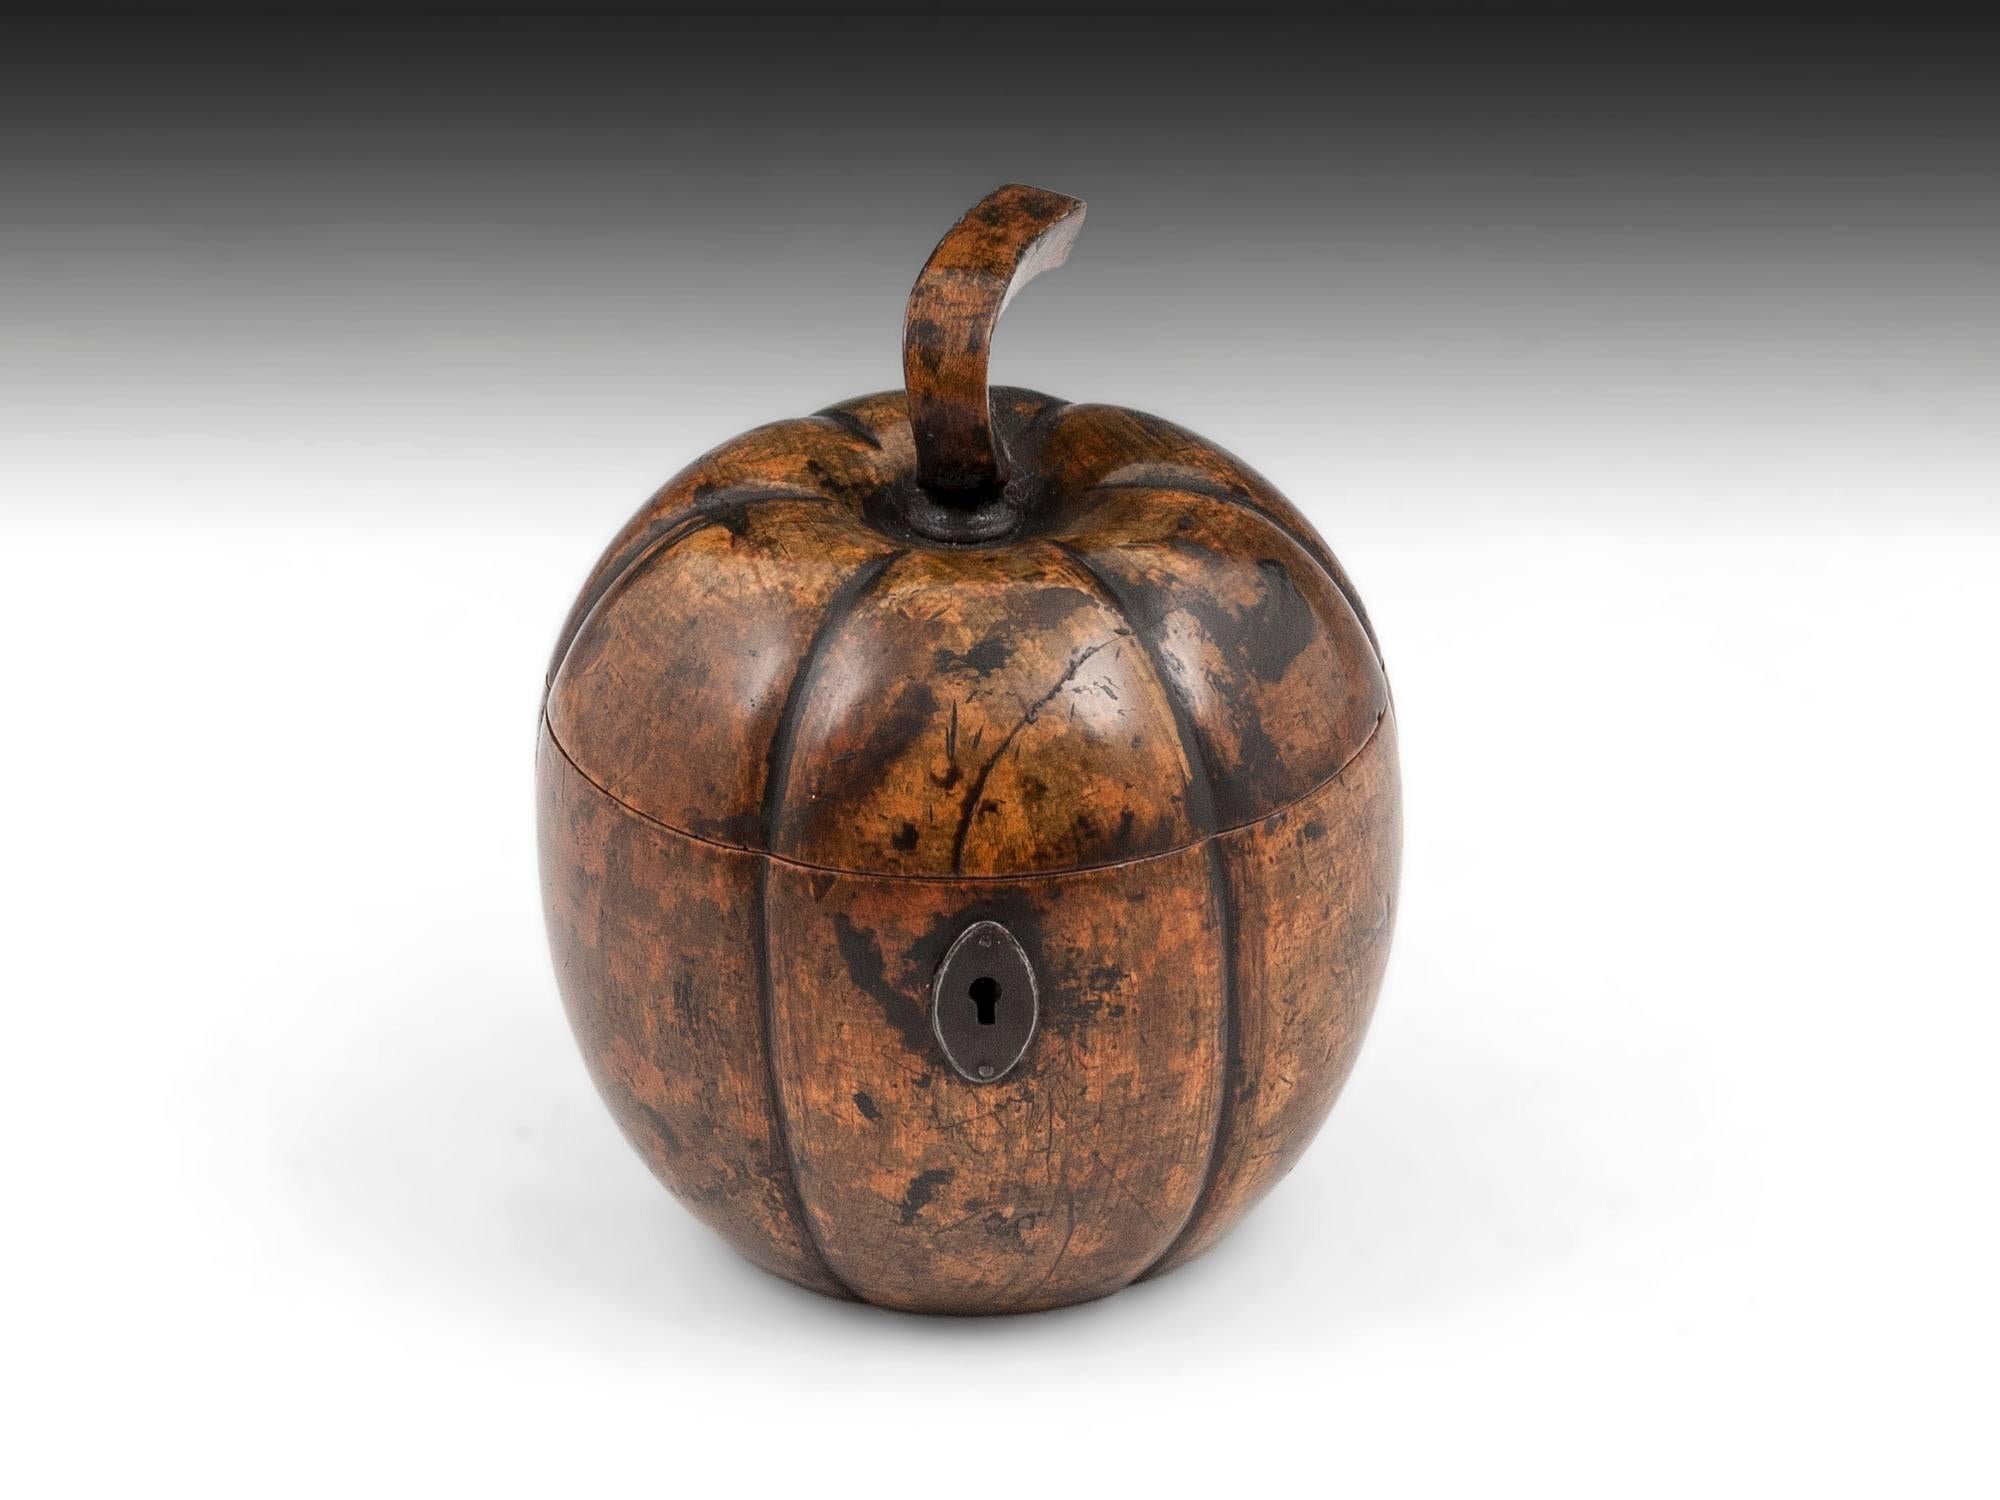 Extremely rare pumpkin / squash six segmented tea caddy in a mellow green and orange mottled colour. Fabulous patination, with a few life scars adding to its character and having its distinguishable shaped squared stalk and oval cut steel